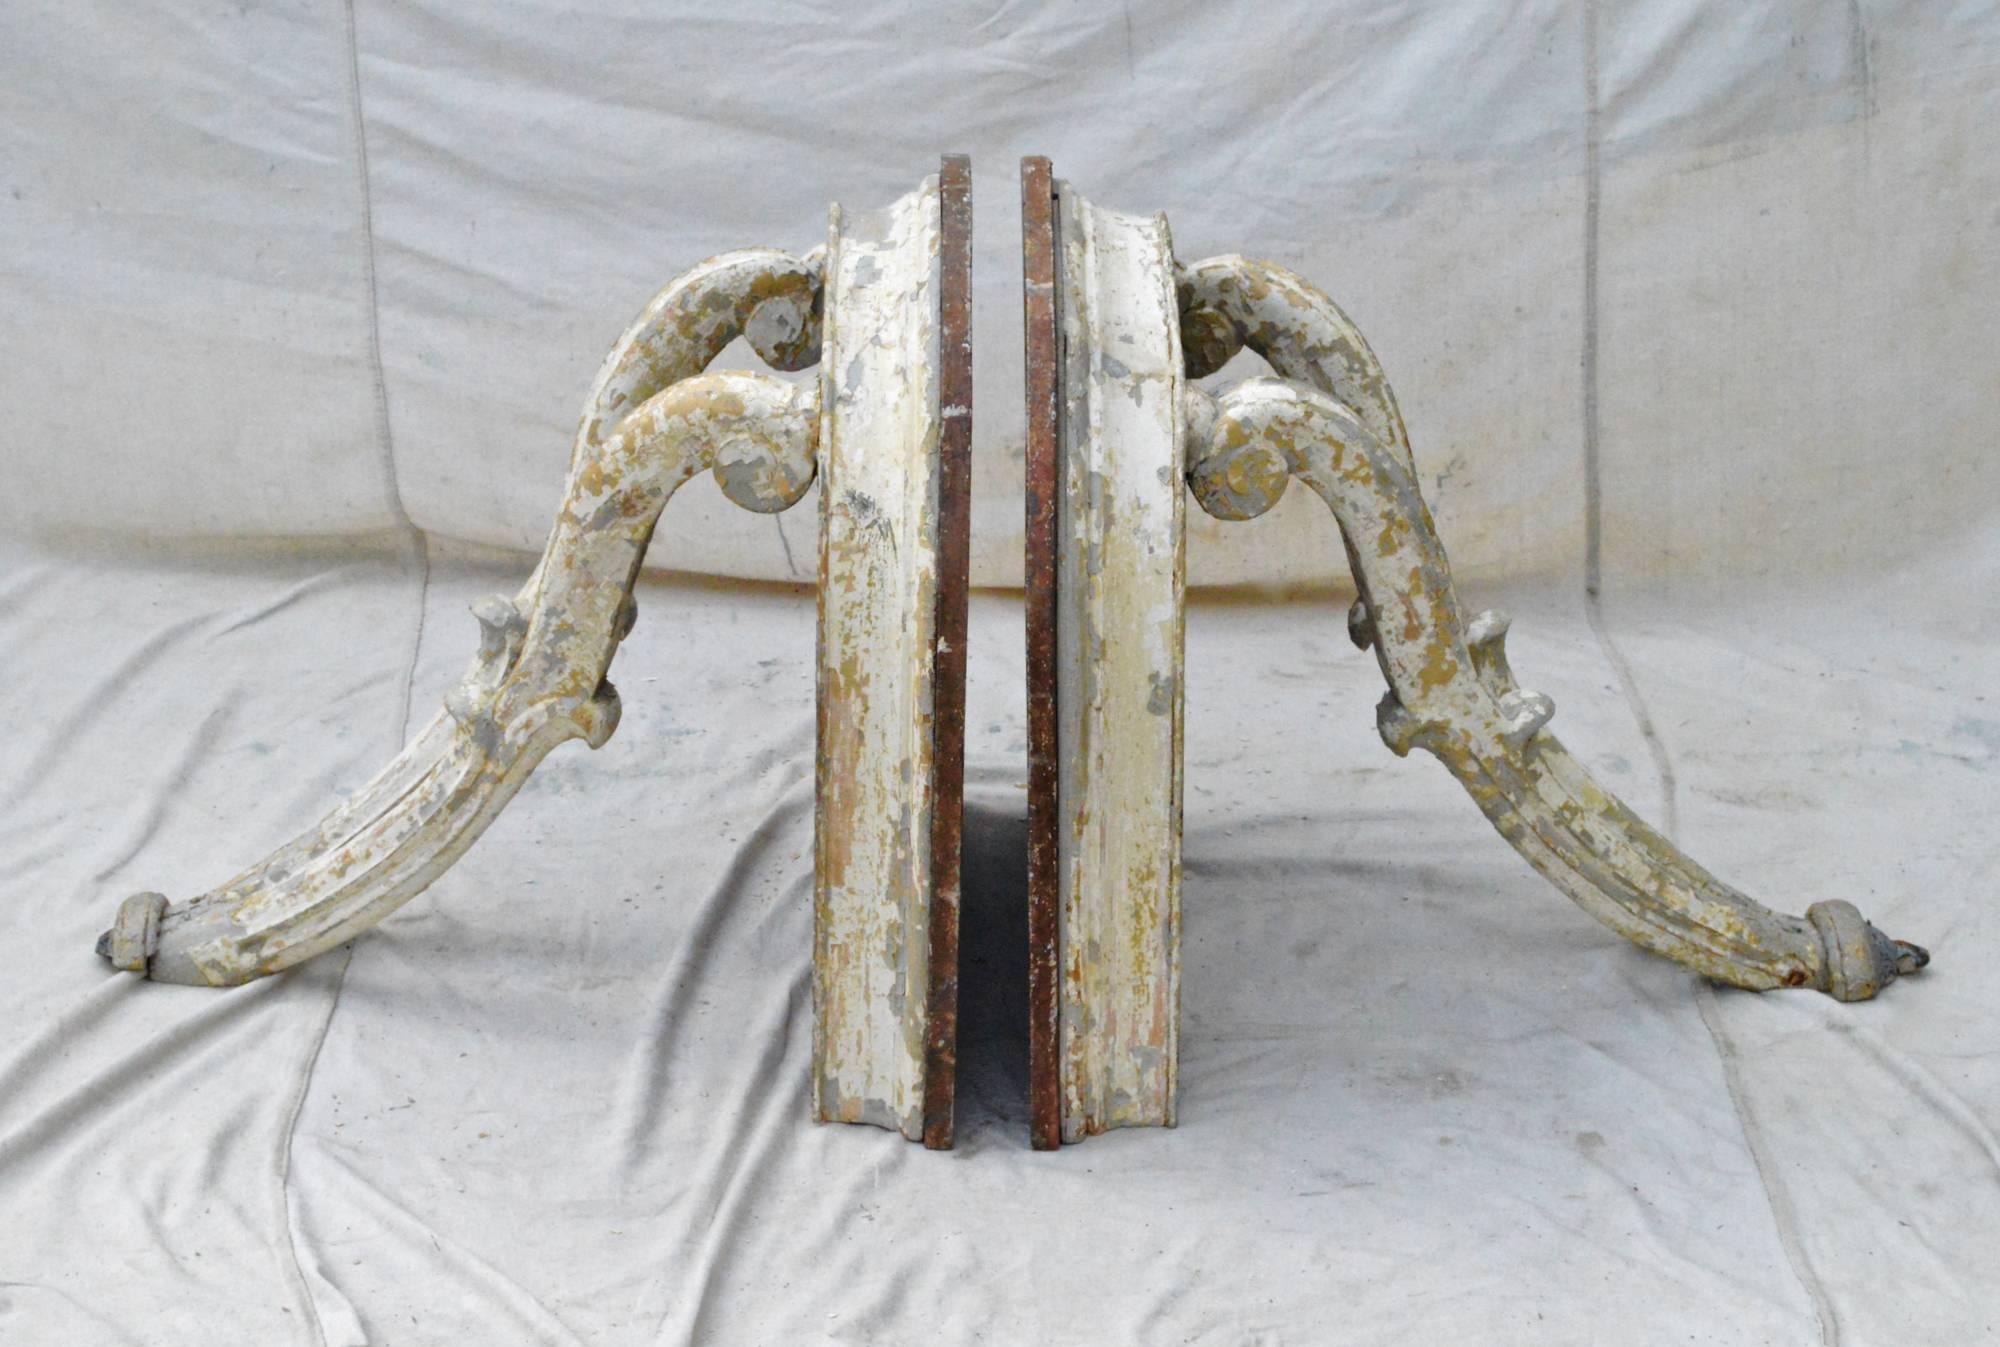 Fantastic pair of wall-mounted consoles with faux marble "D" shaped tops resting on molded demilune shaped aprons and ending with curving, Baroque scrolled legs. Late 19th century.